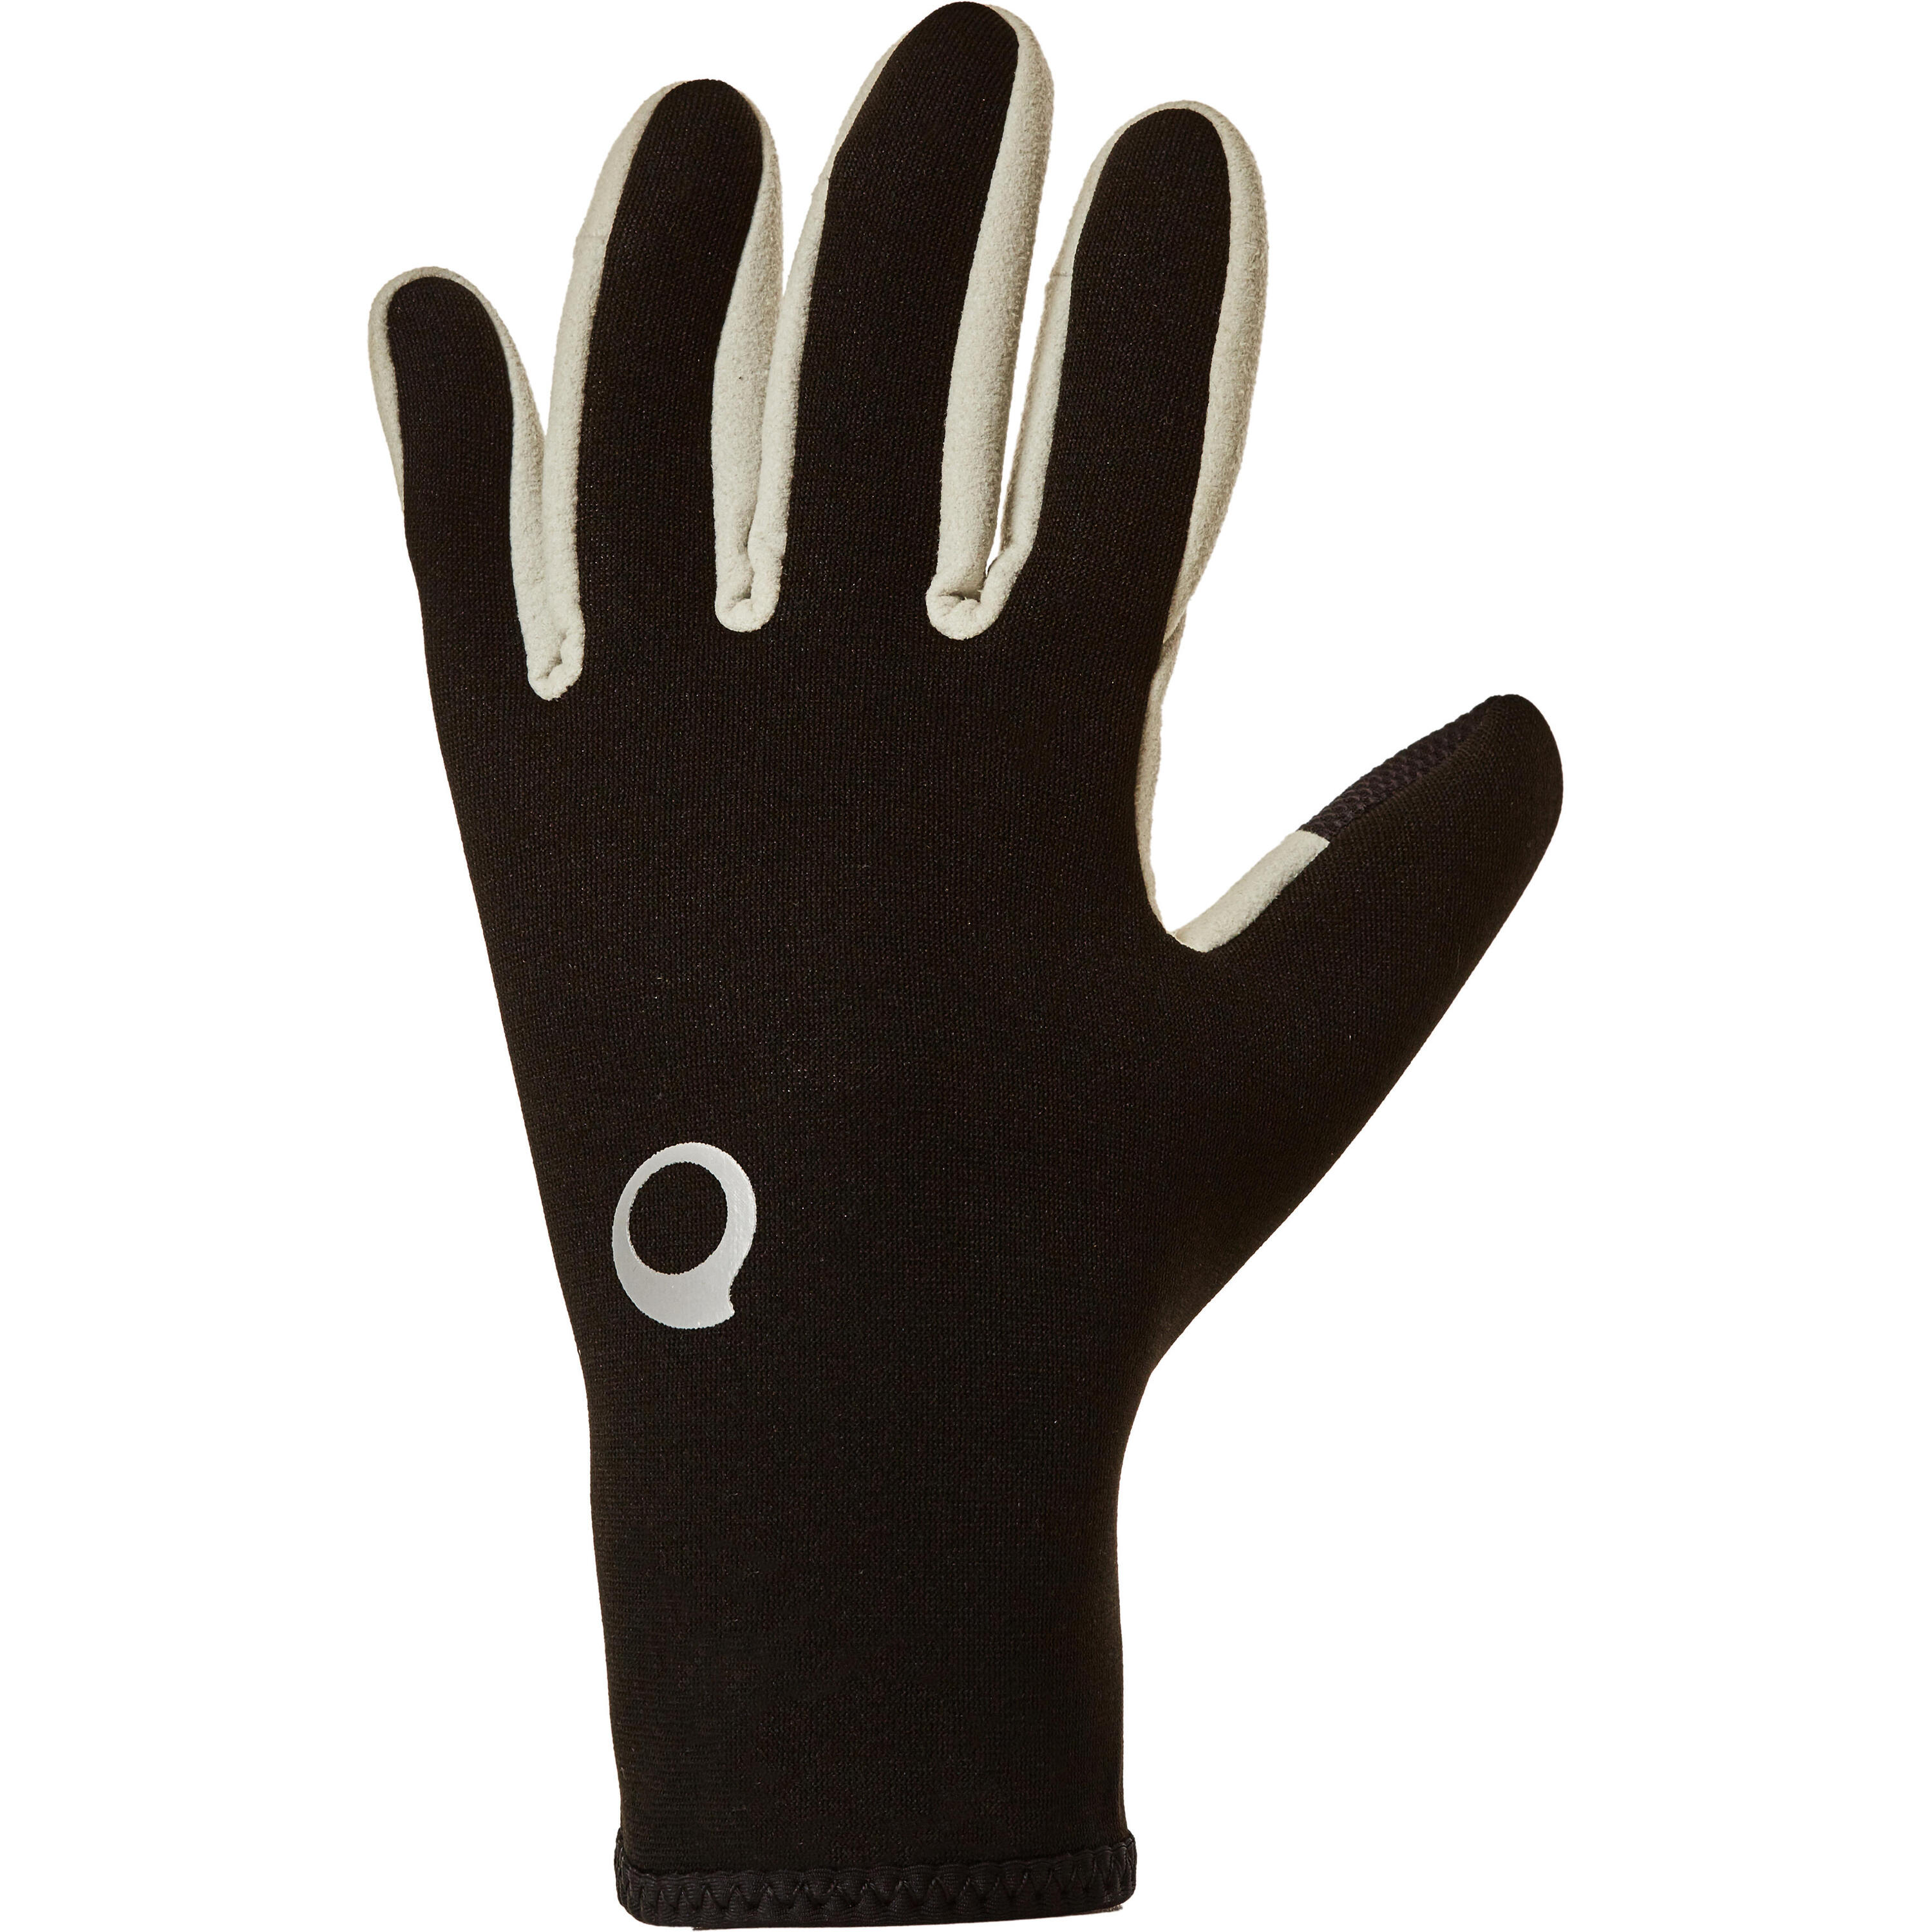 Supratex reinforced SPF 500 Spearfishing Gloves 2 mm 1/8